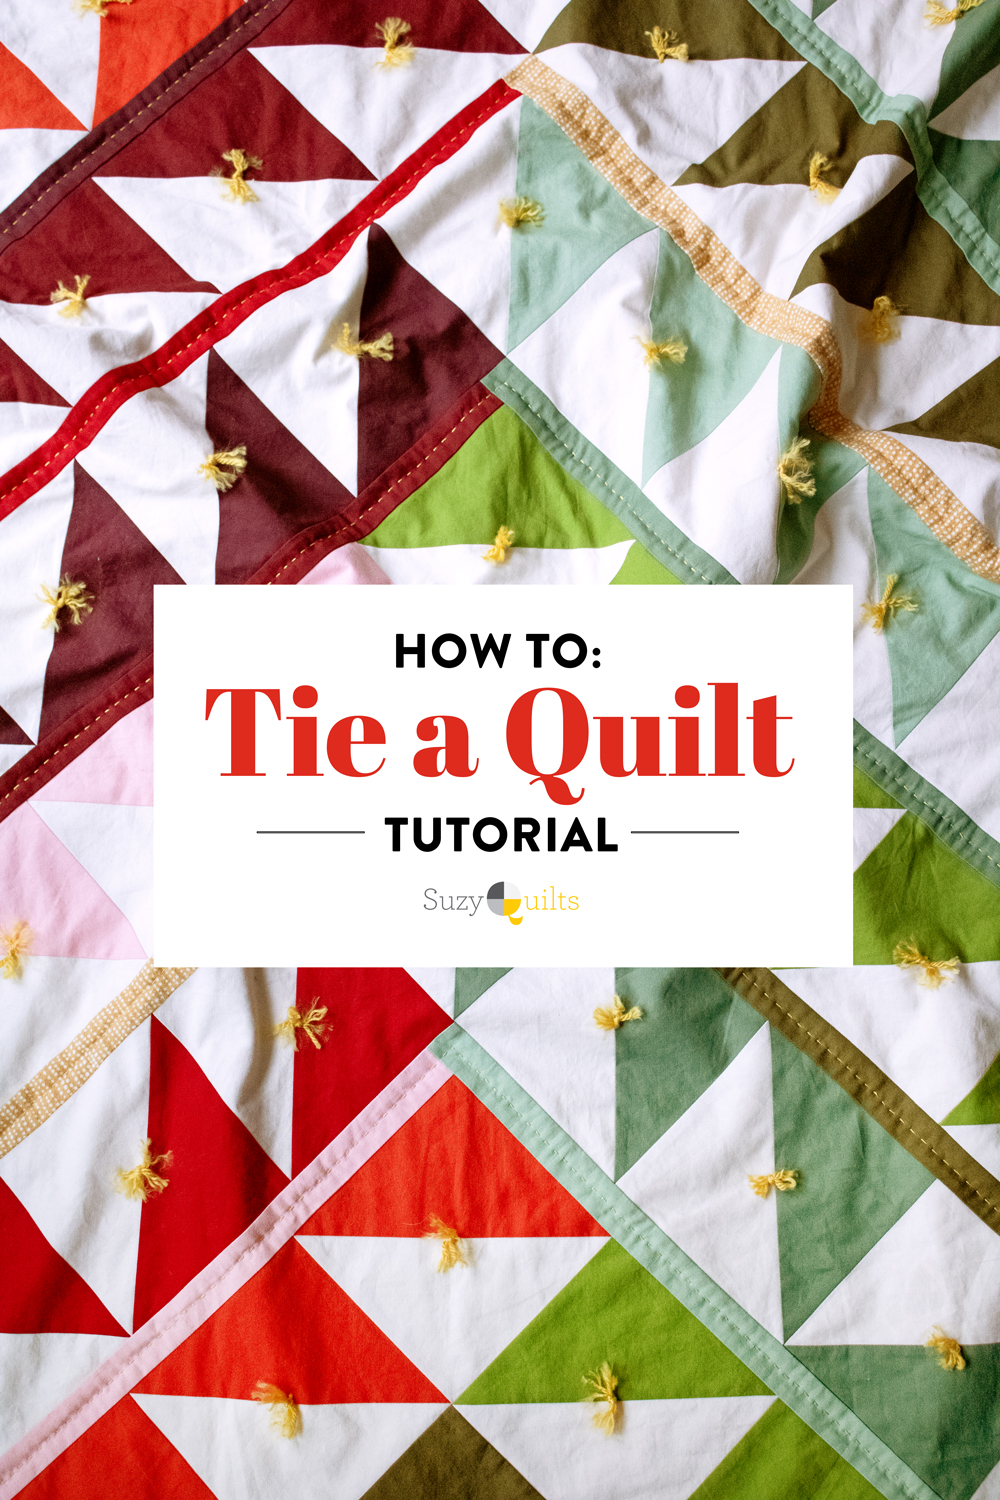 What Thread Is The Best For Tying A Quilt?